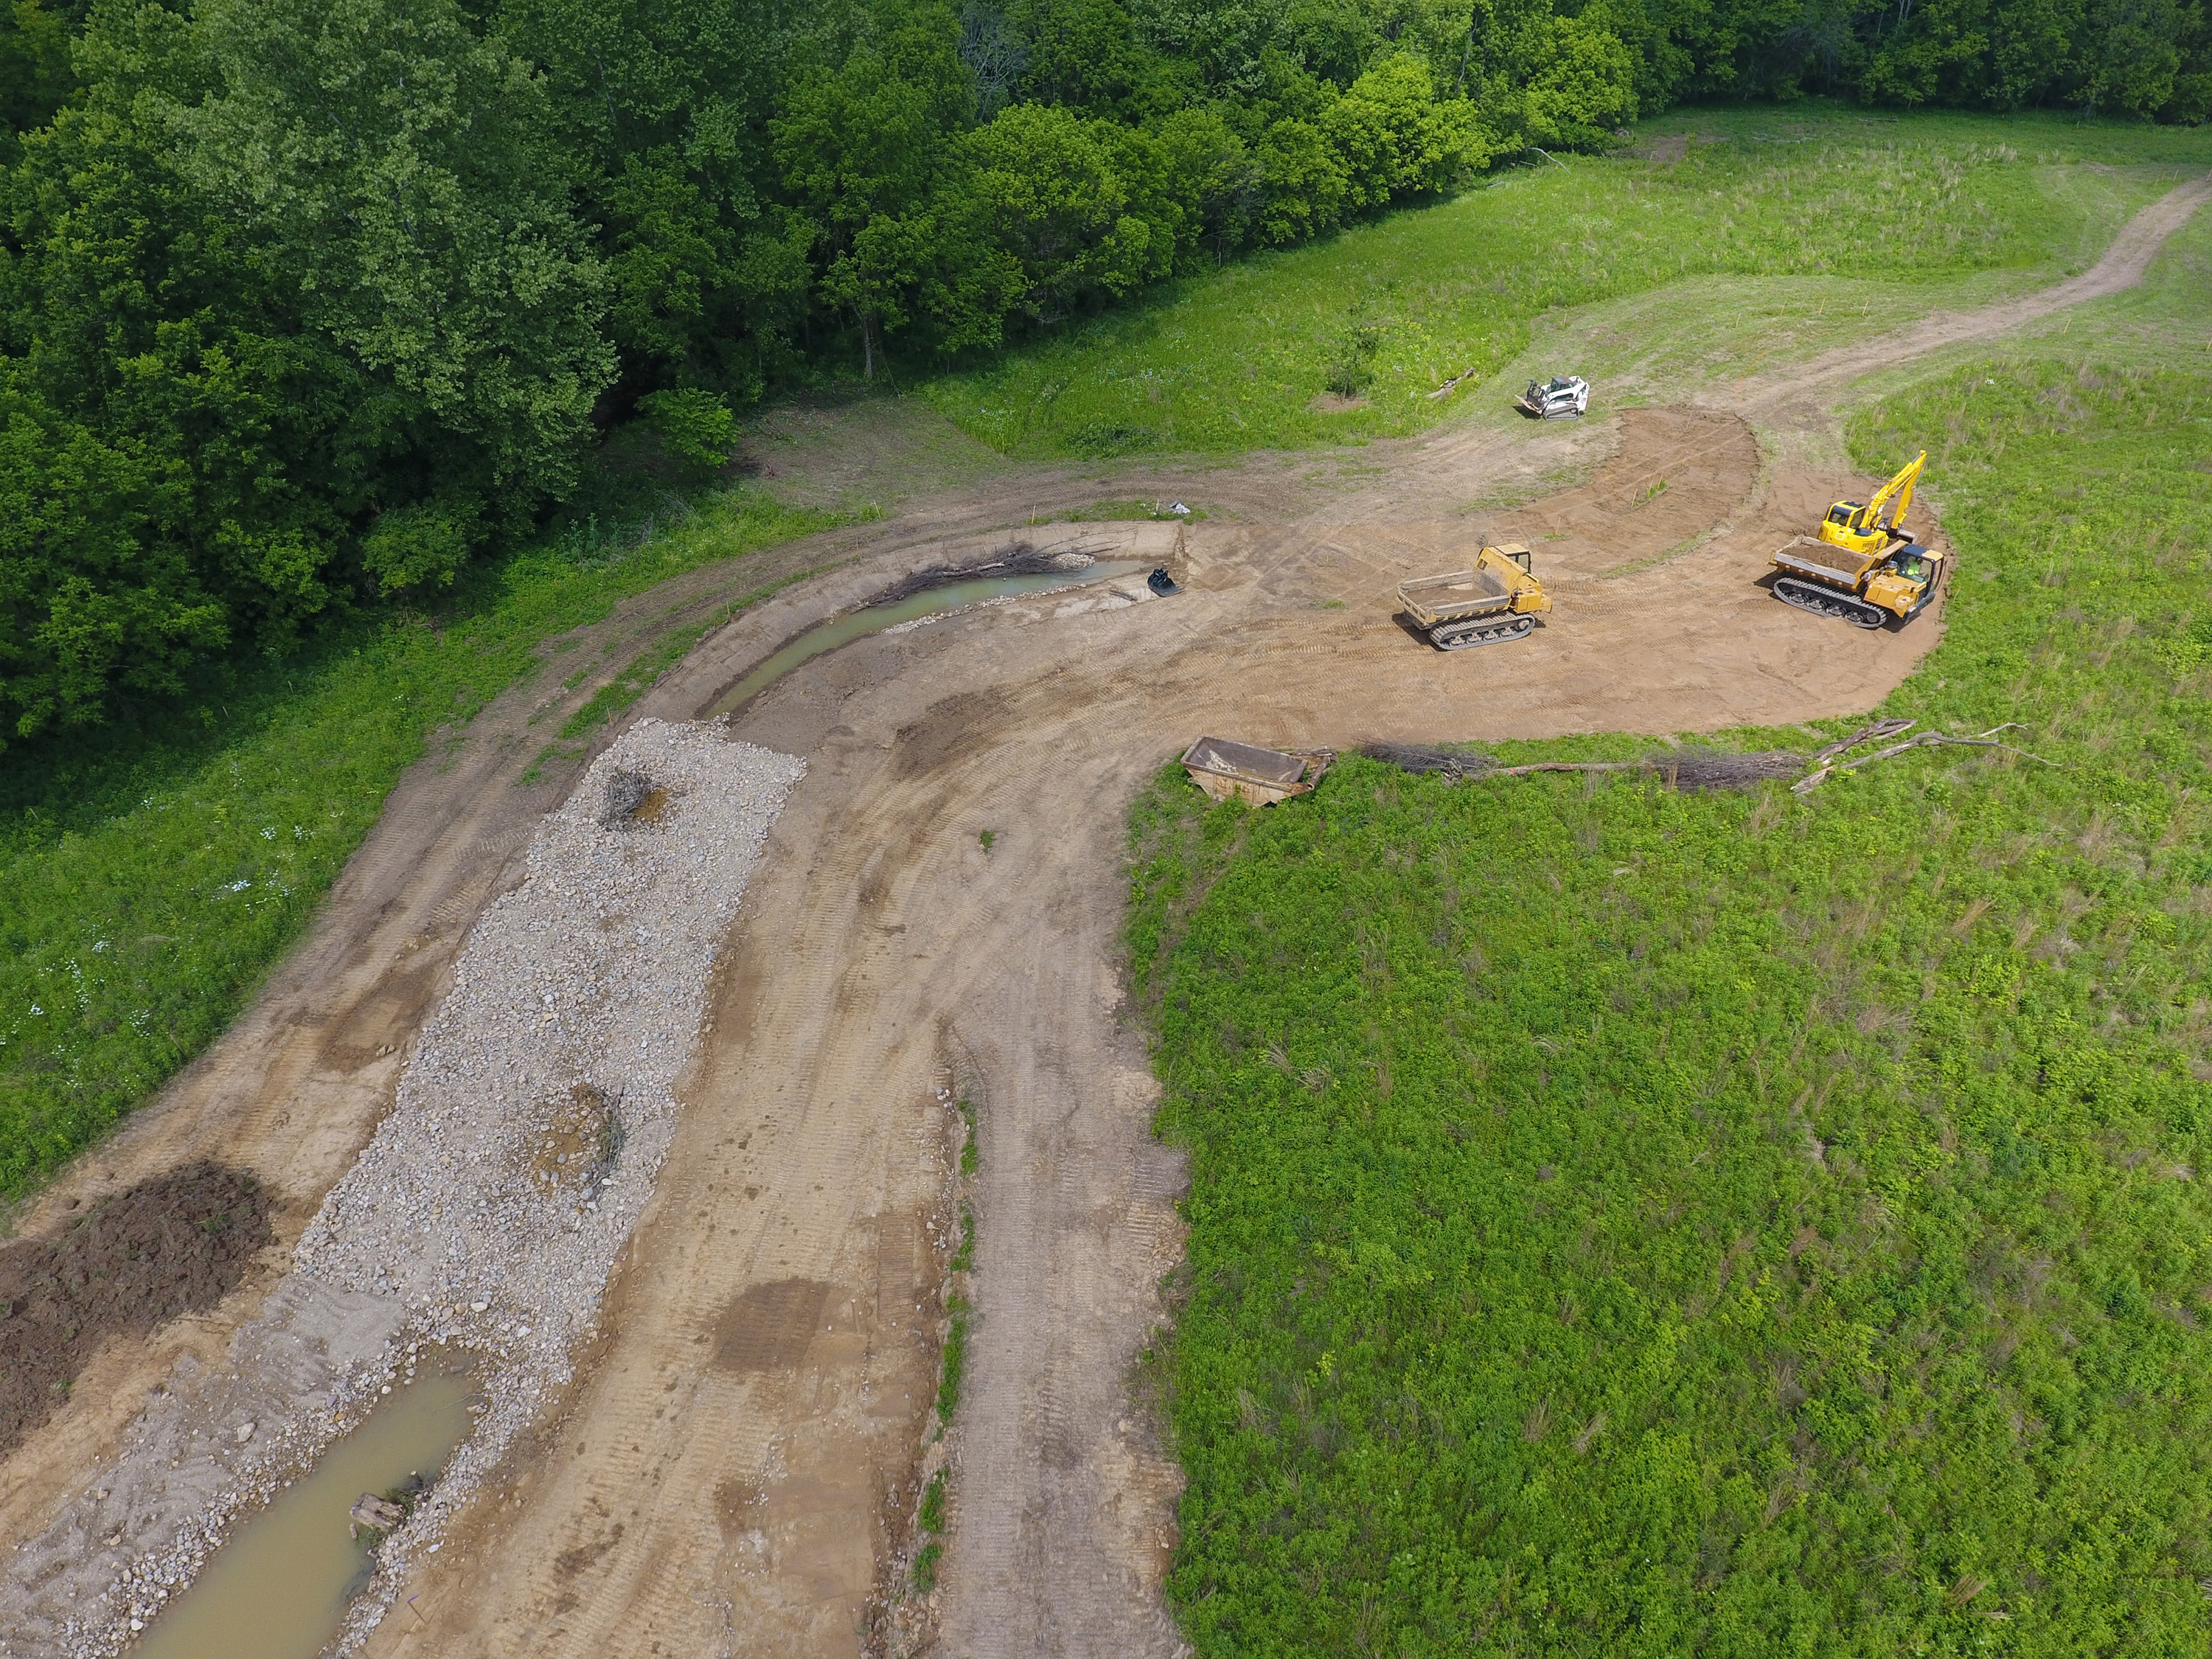 Construction crews work to dig new stream bed near forest.